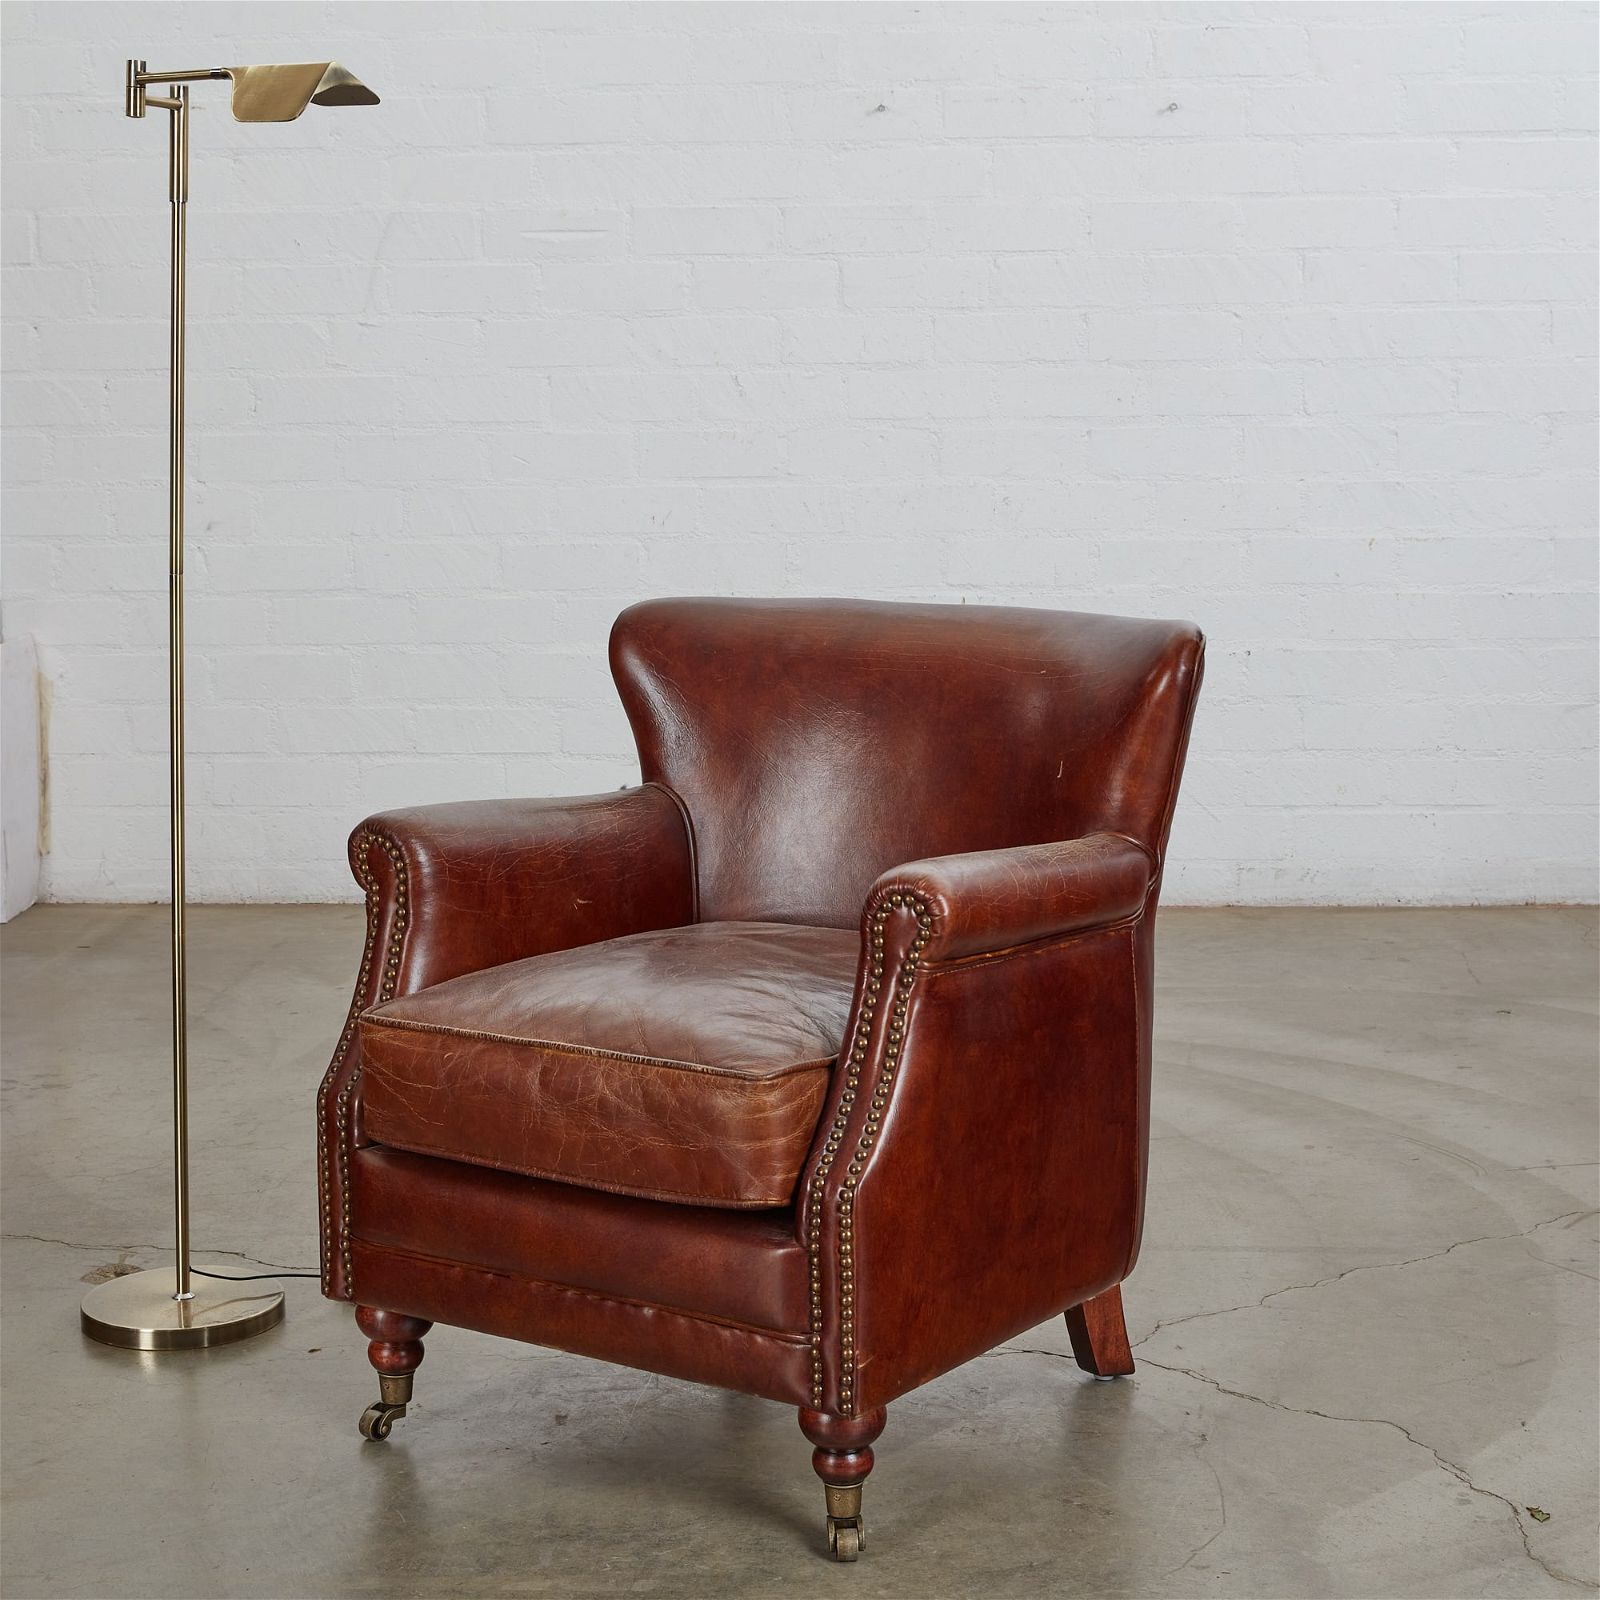 A BROWN LEATHER ARMCHAIR AND READING